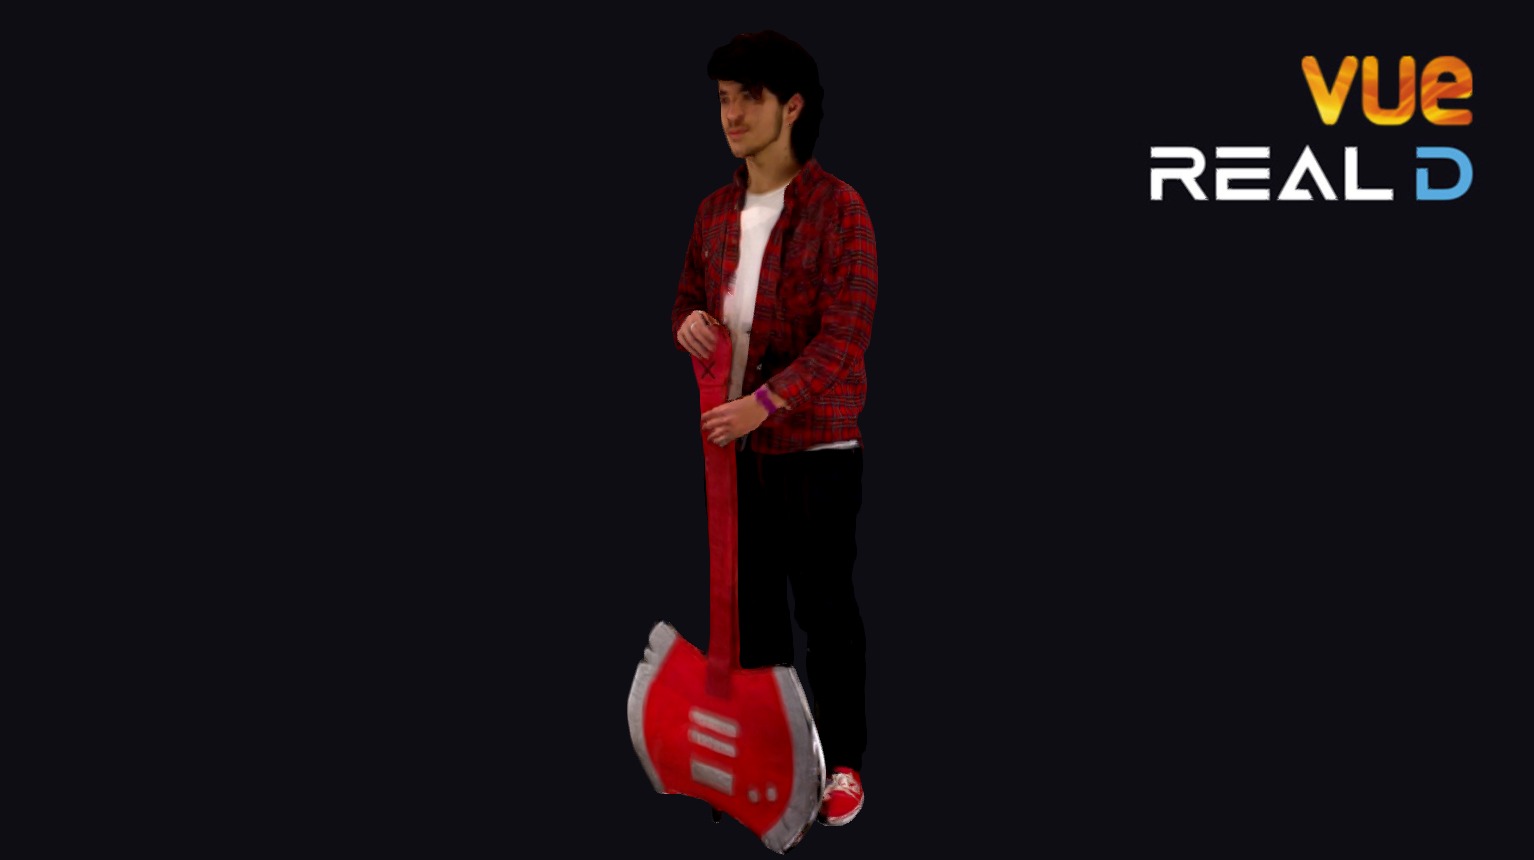 Red axe bass guitar - Marshall Lee - 3D model by RealD 3d model